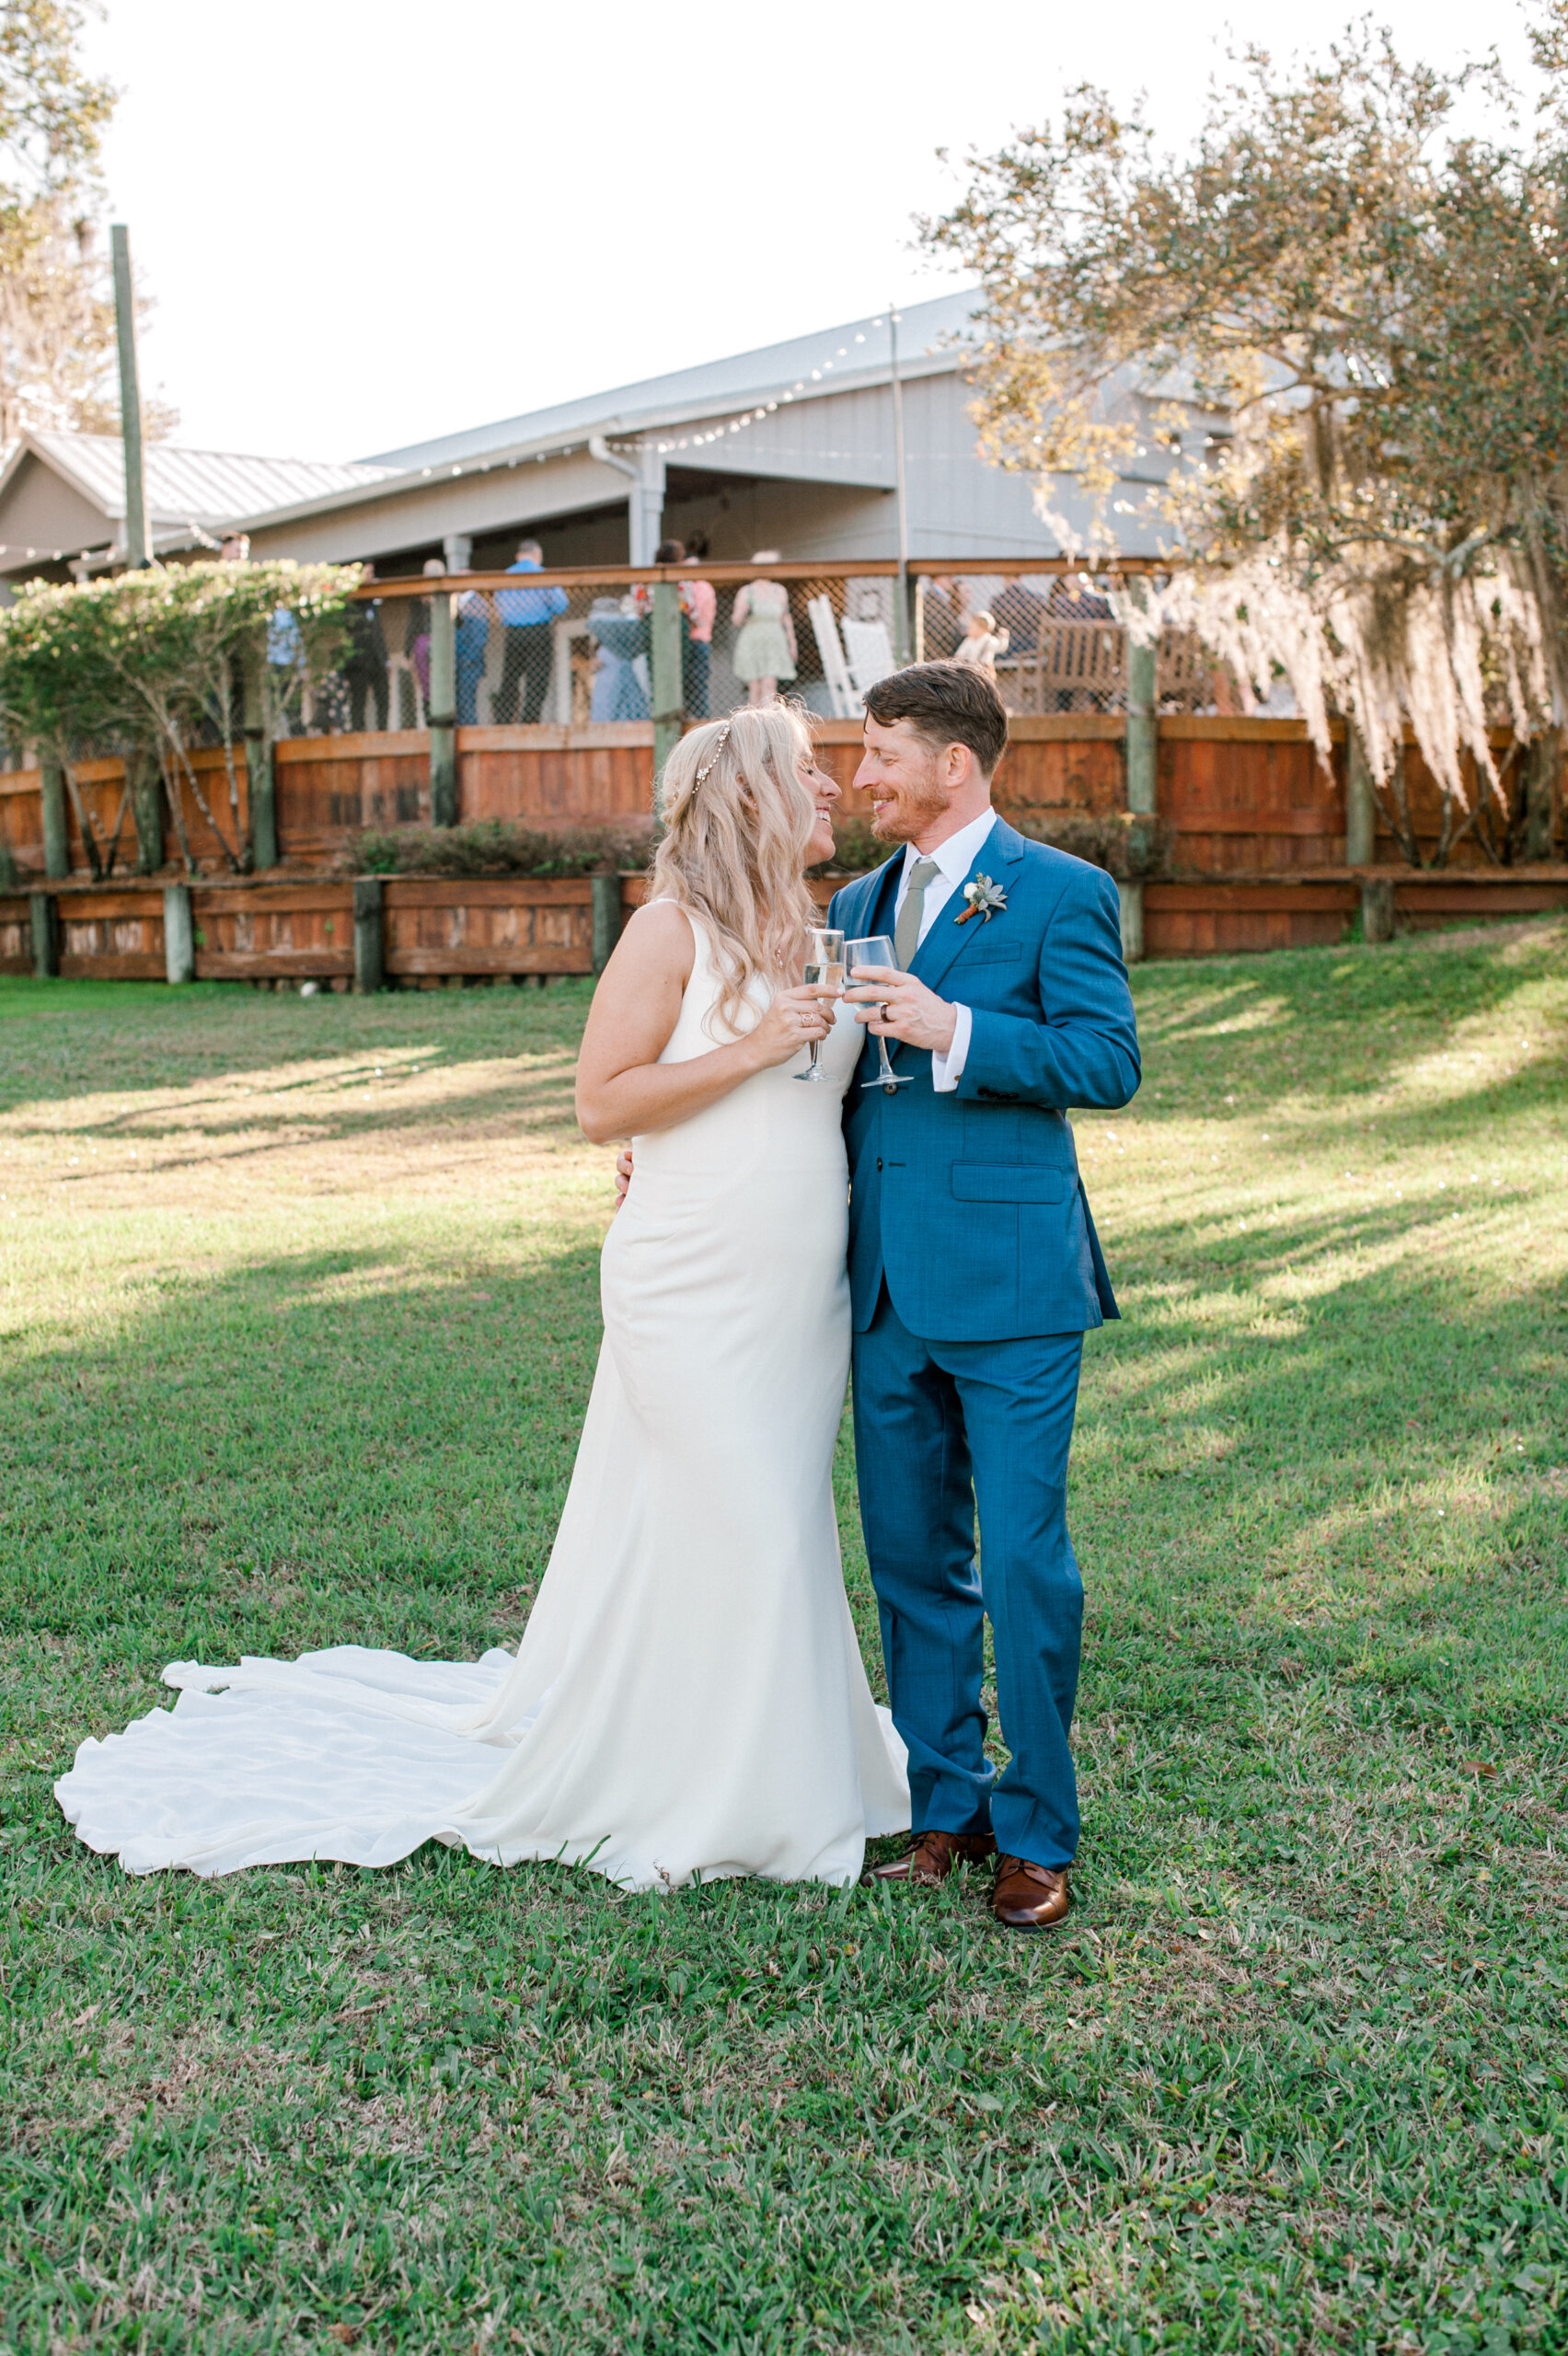 The boathouse at Up The Creek Farms is the perfect reception area and makes a beautiful backdrop for a photo of the bride and groom with guests behind them on their wedding day.